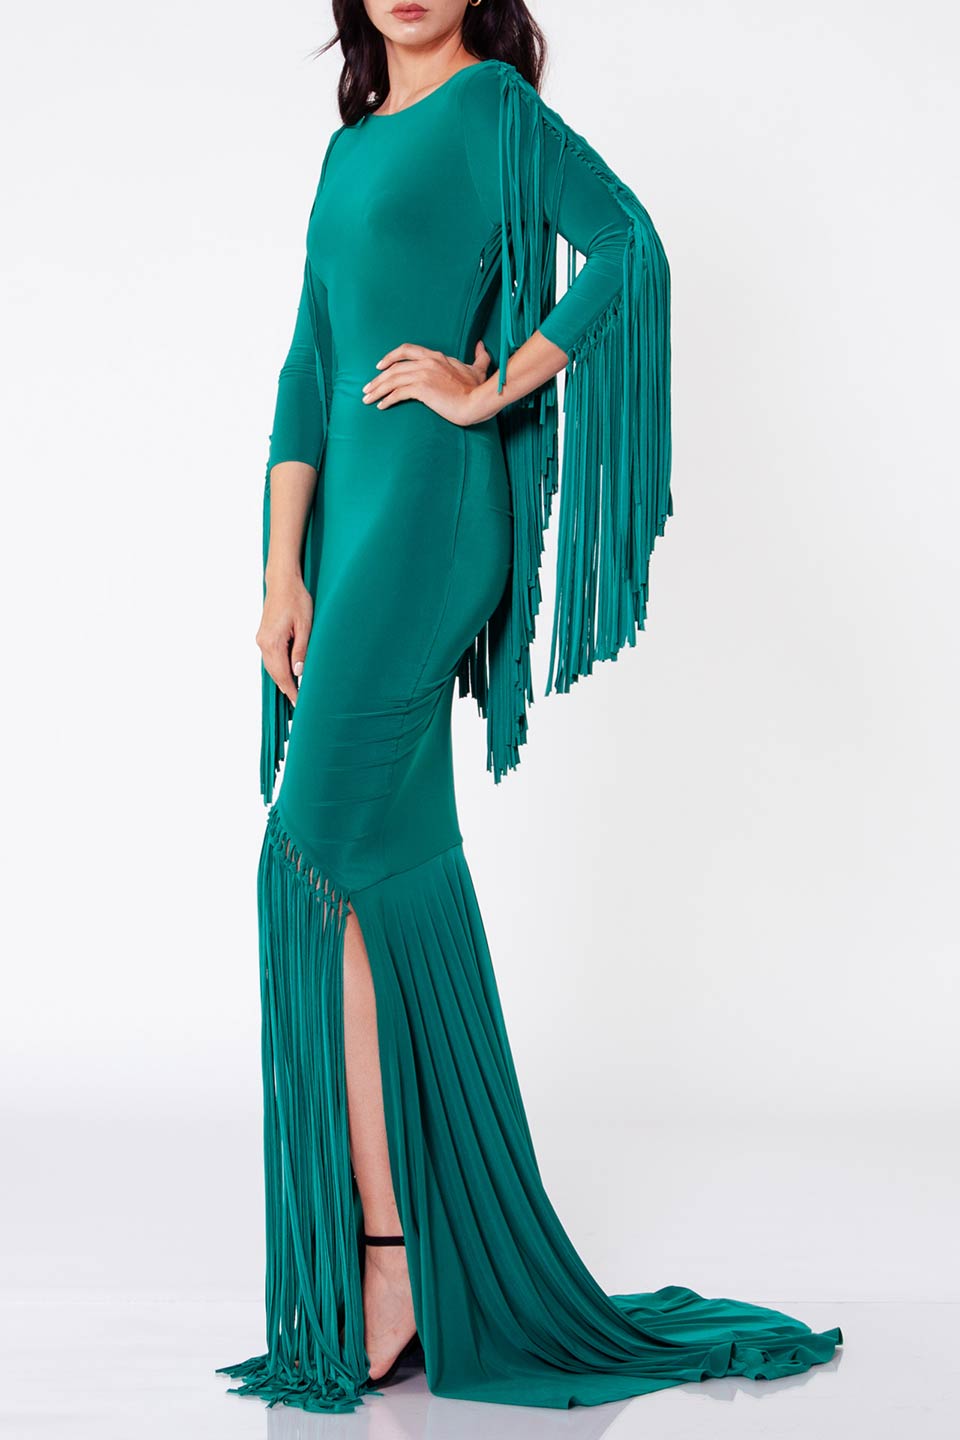 Designer Green Maxi dresses, shop online with free delivery in UAE. Product gallery 5